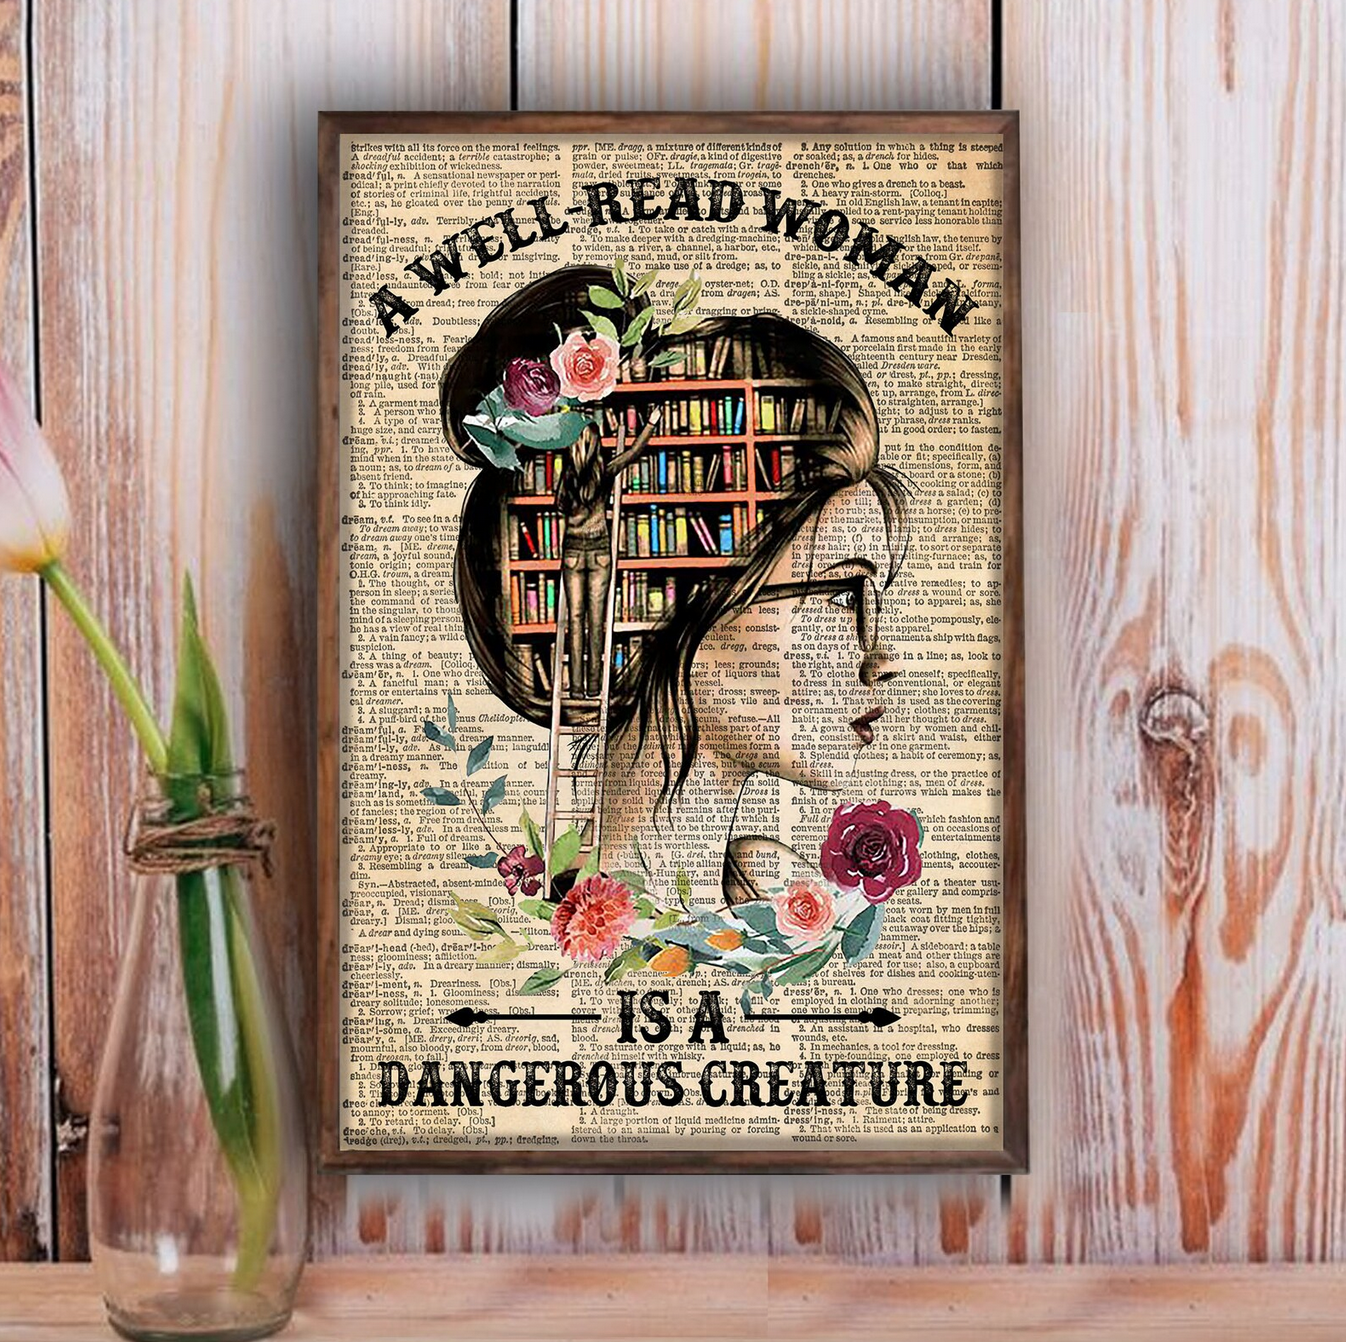 A poster of the silhouette of a woman with the text "A well read woman is a dangerous creature"